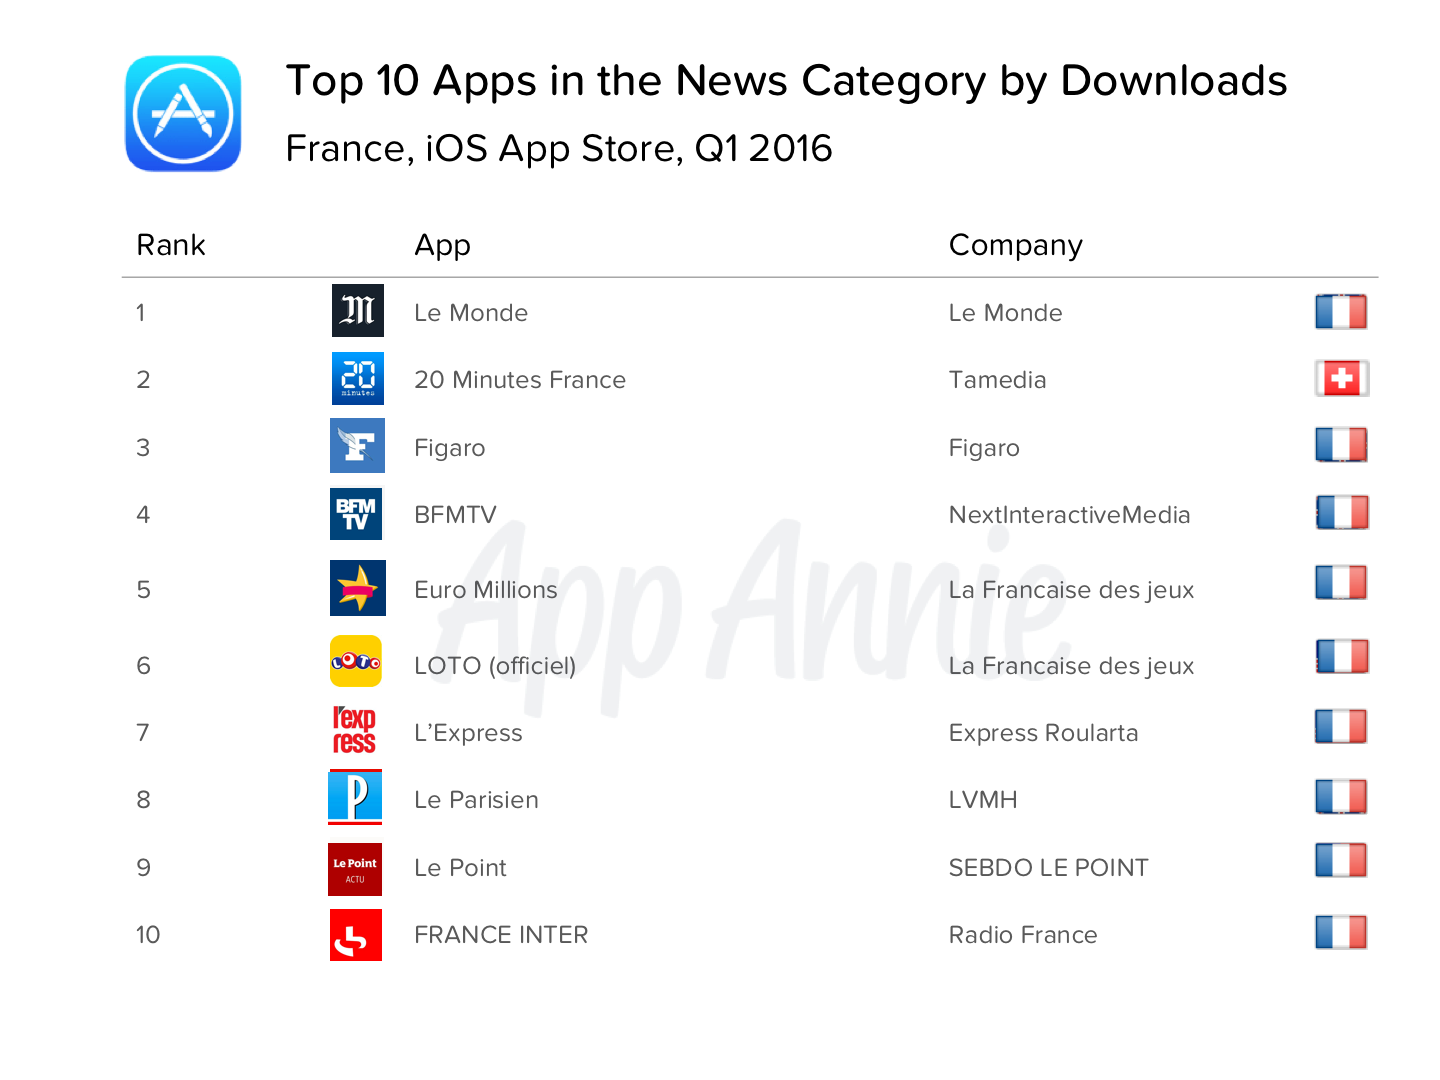 Top 10 Apps in the News Category by Downloads France iOS App Store Q1 2016